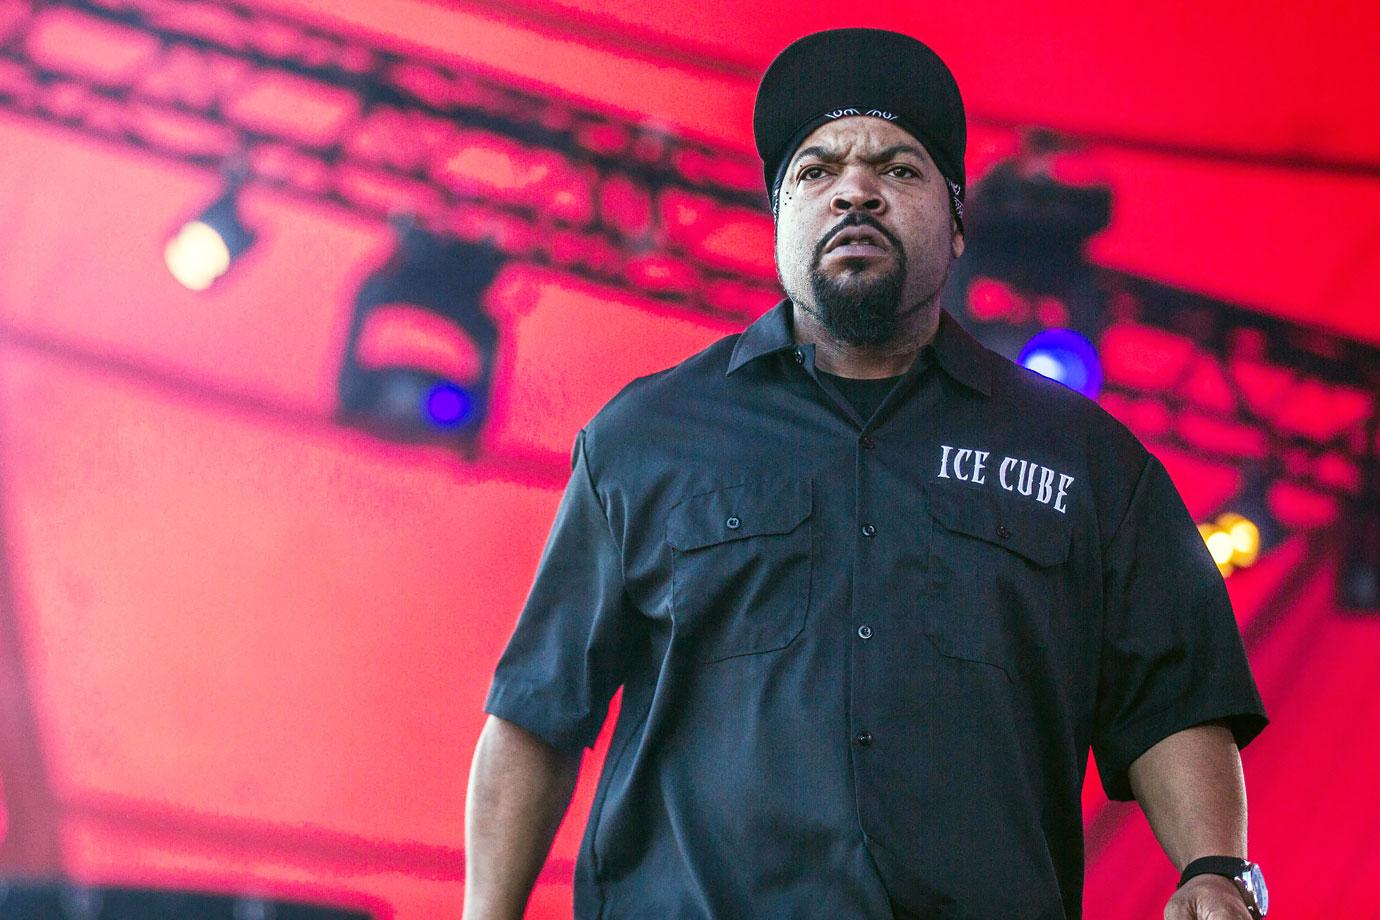 Ice Cube Quits New Movie After Refusing Covid-19 Vaccine, Gives Up $9  Million Paycheck